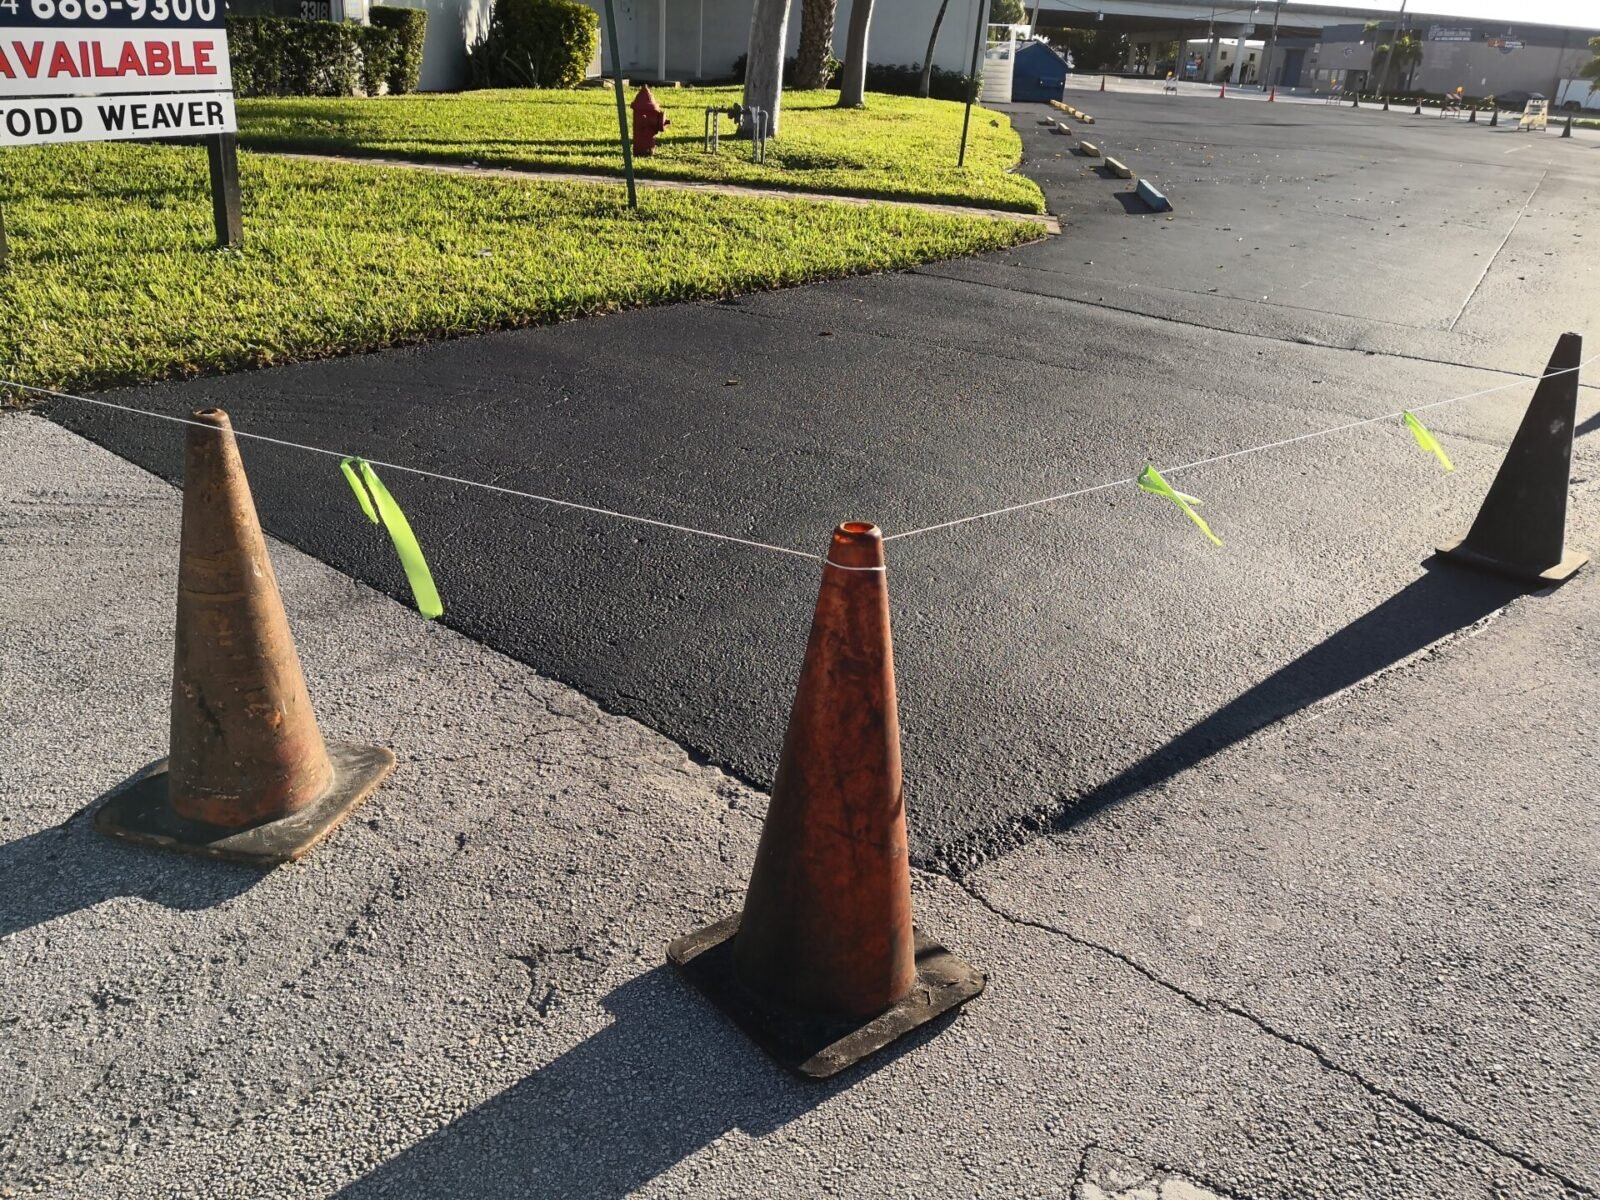 Two traffic cones are connected by a thin rope with yellow flags marking off a section of Palm Beach Asphalts freshly paved area next to a grassy patch. In the background, a sign reads AVAILABLE, hinting at the contractor's meticulous asphalt paving work.